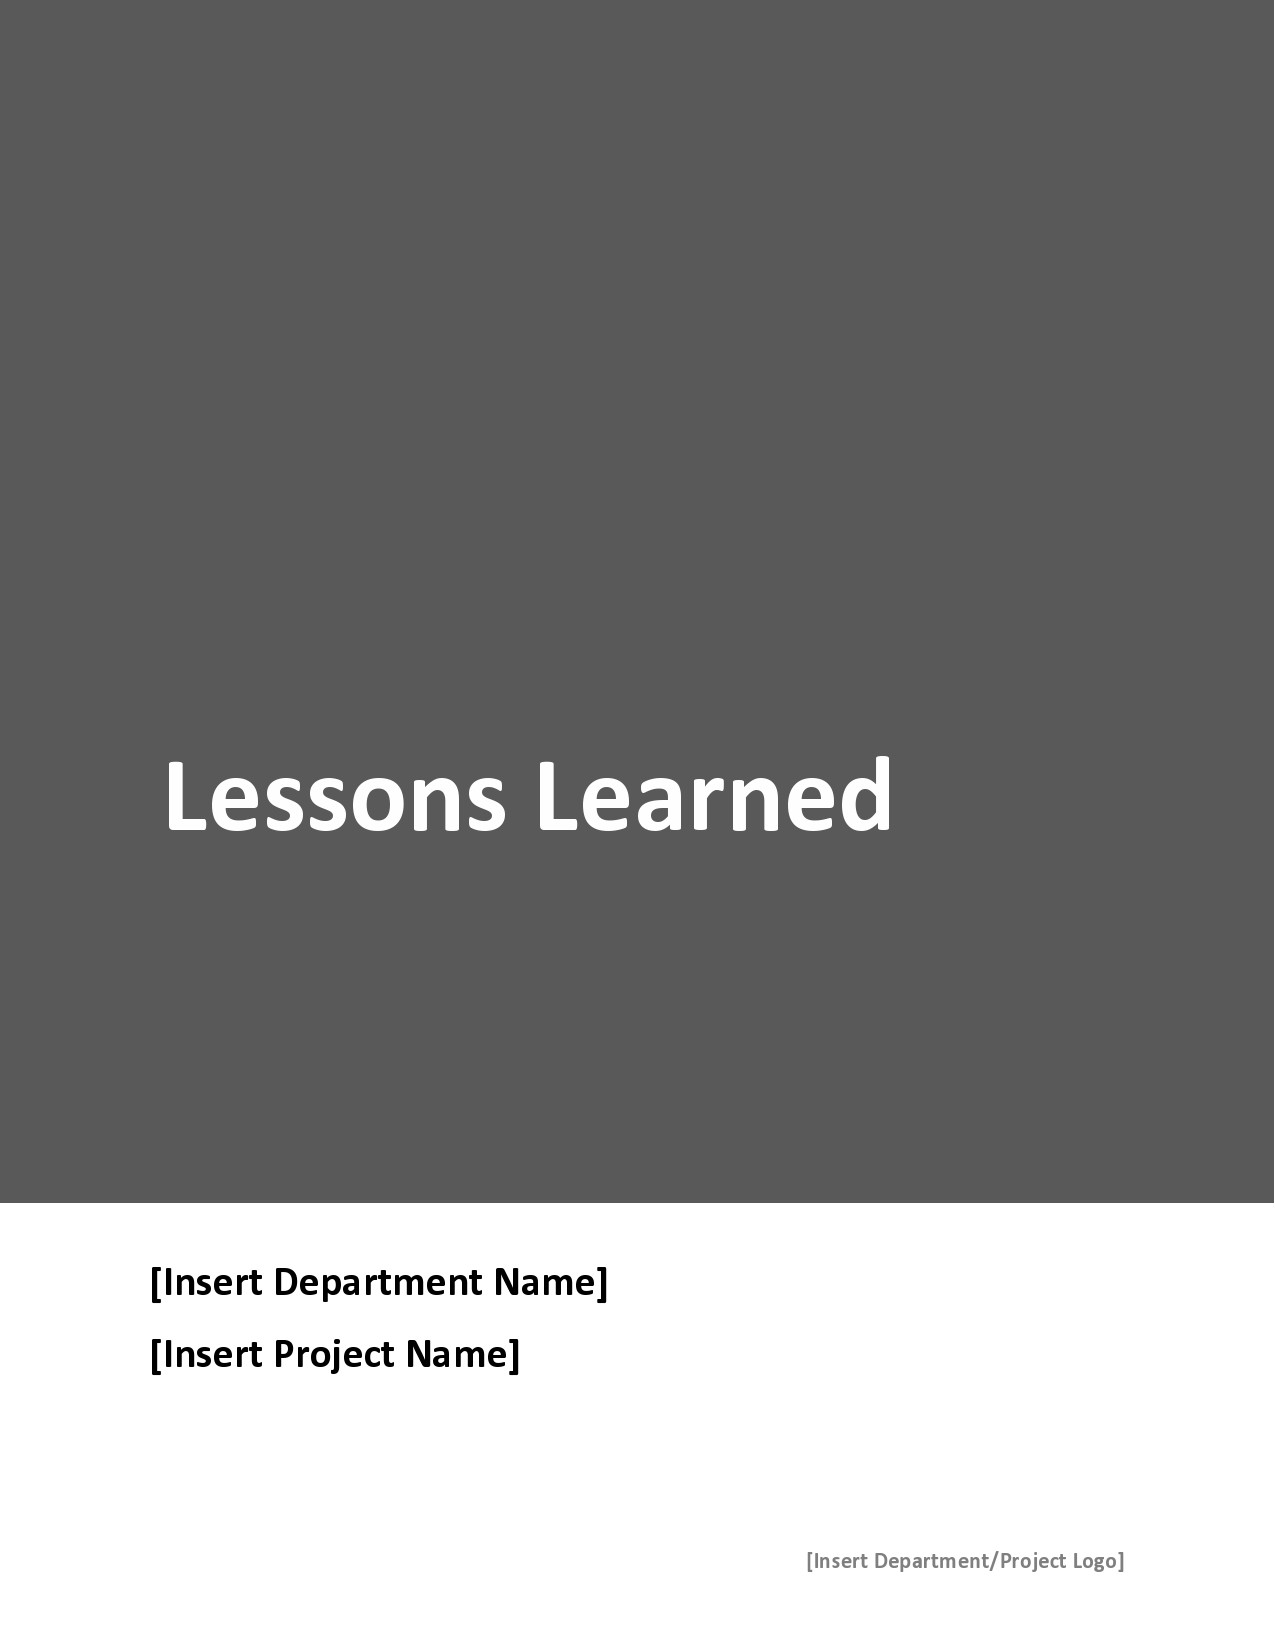 Free lessons learned template 05